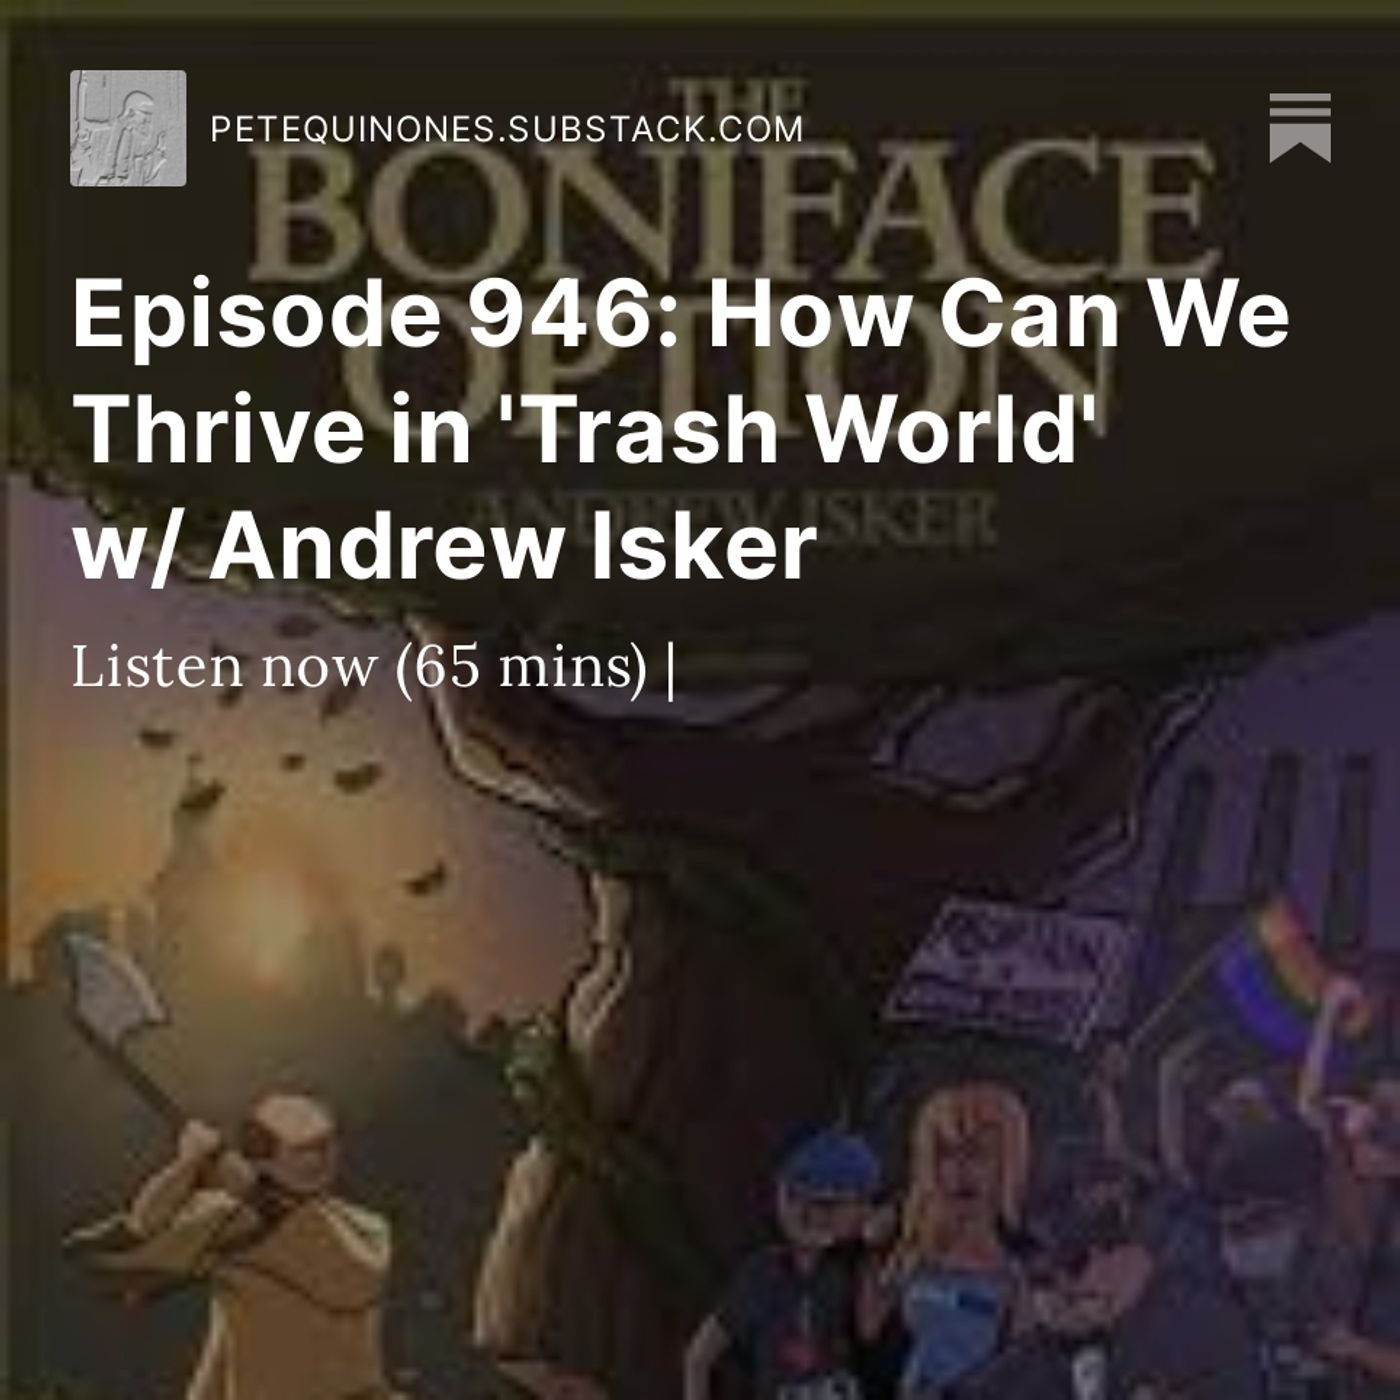 Episode 946: How Can We Thrive in 'Trash World' w/ Andrew Isker